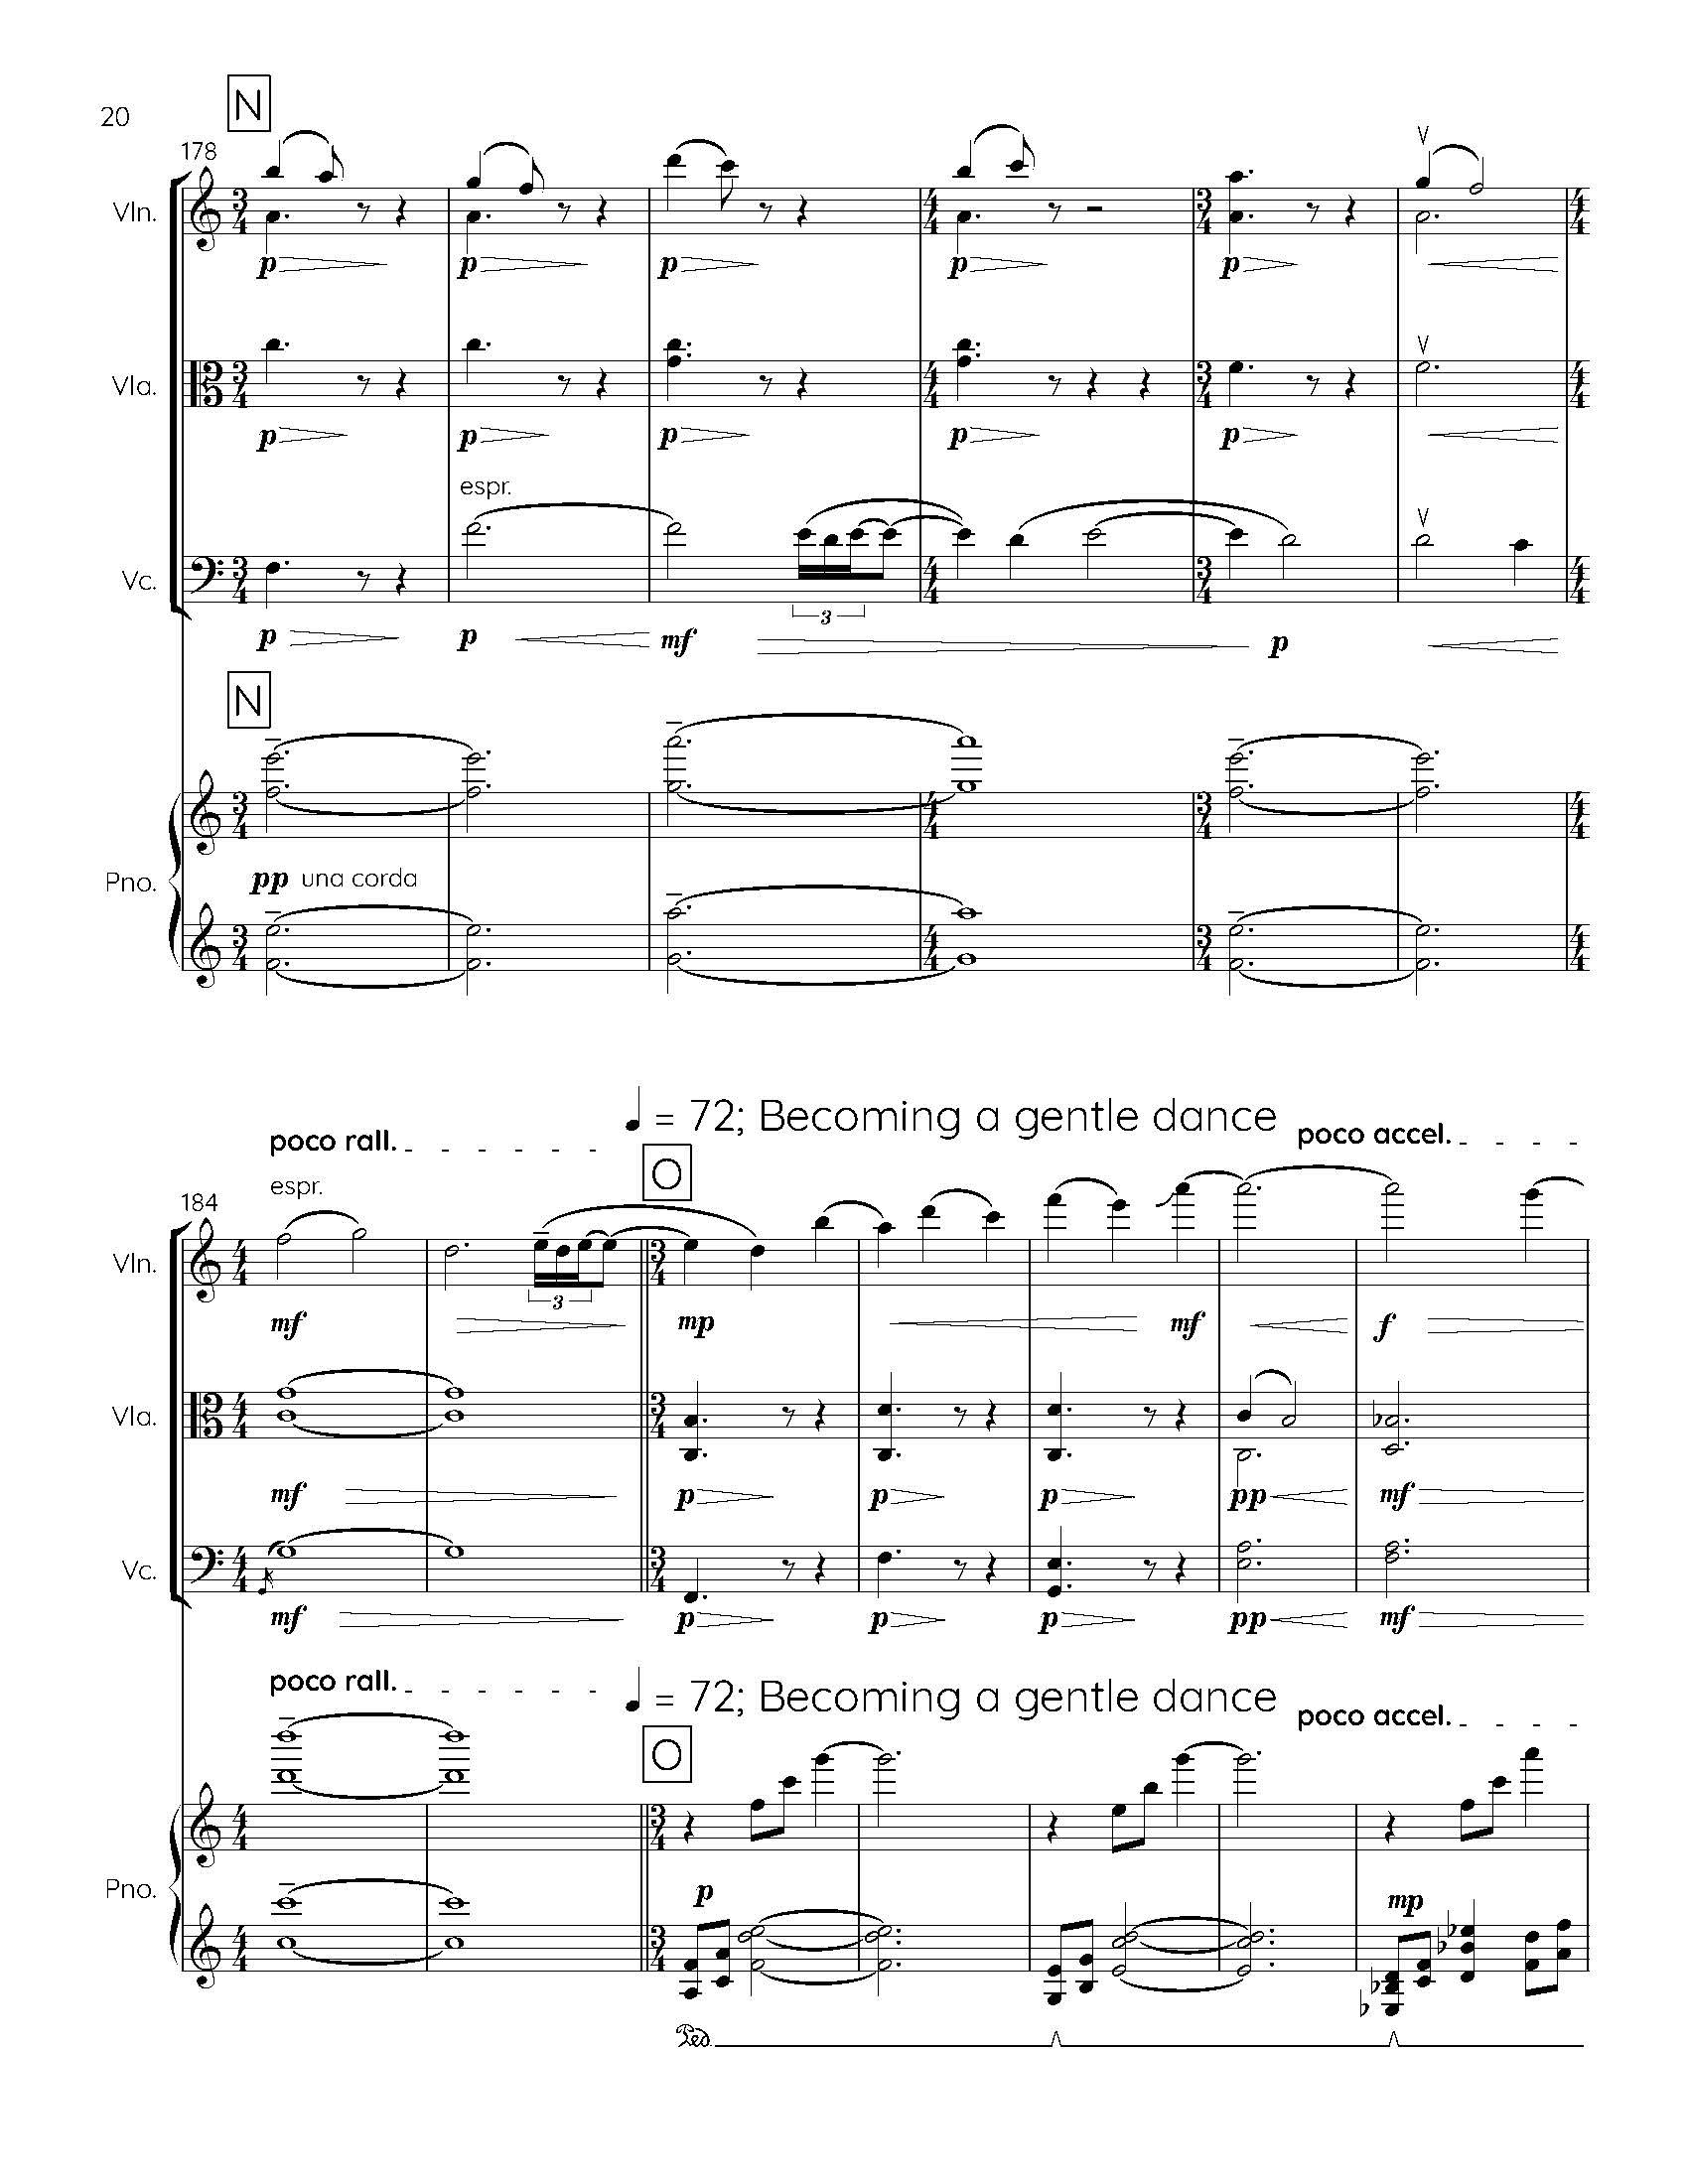 I S L A N D I - Complete Score_Page_26.jpg